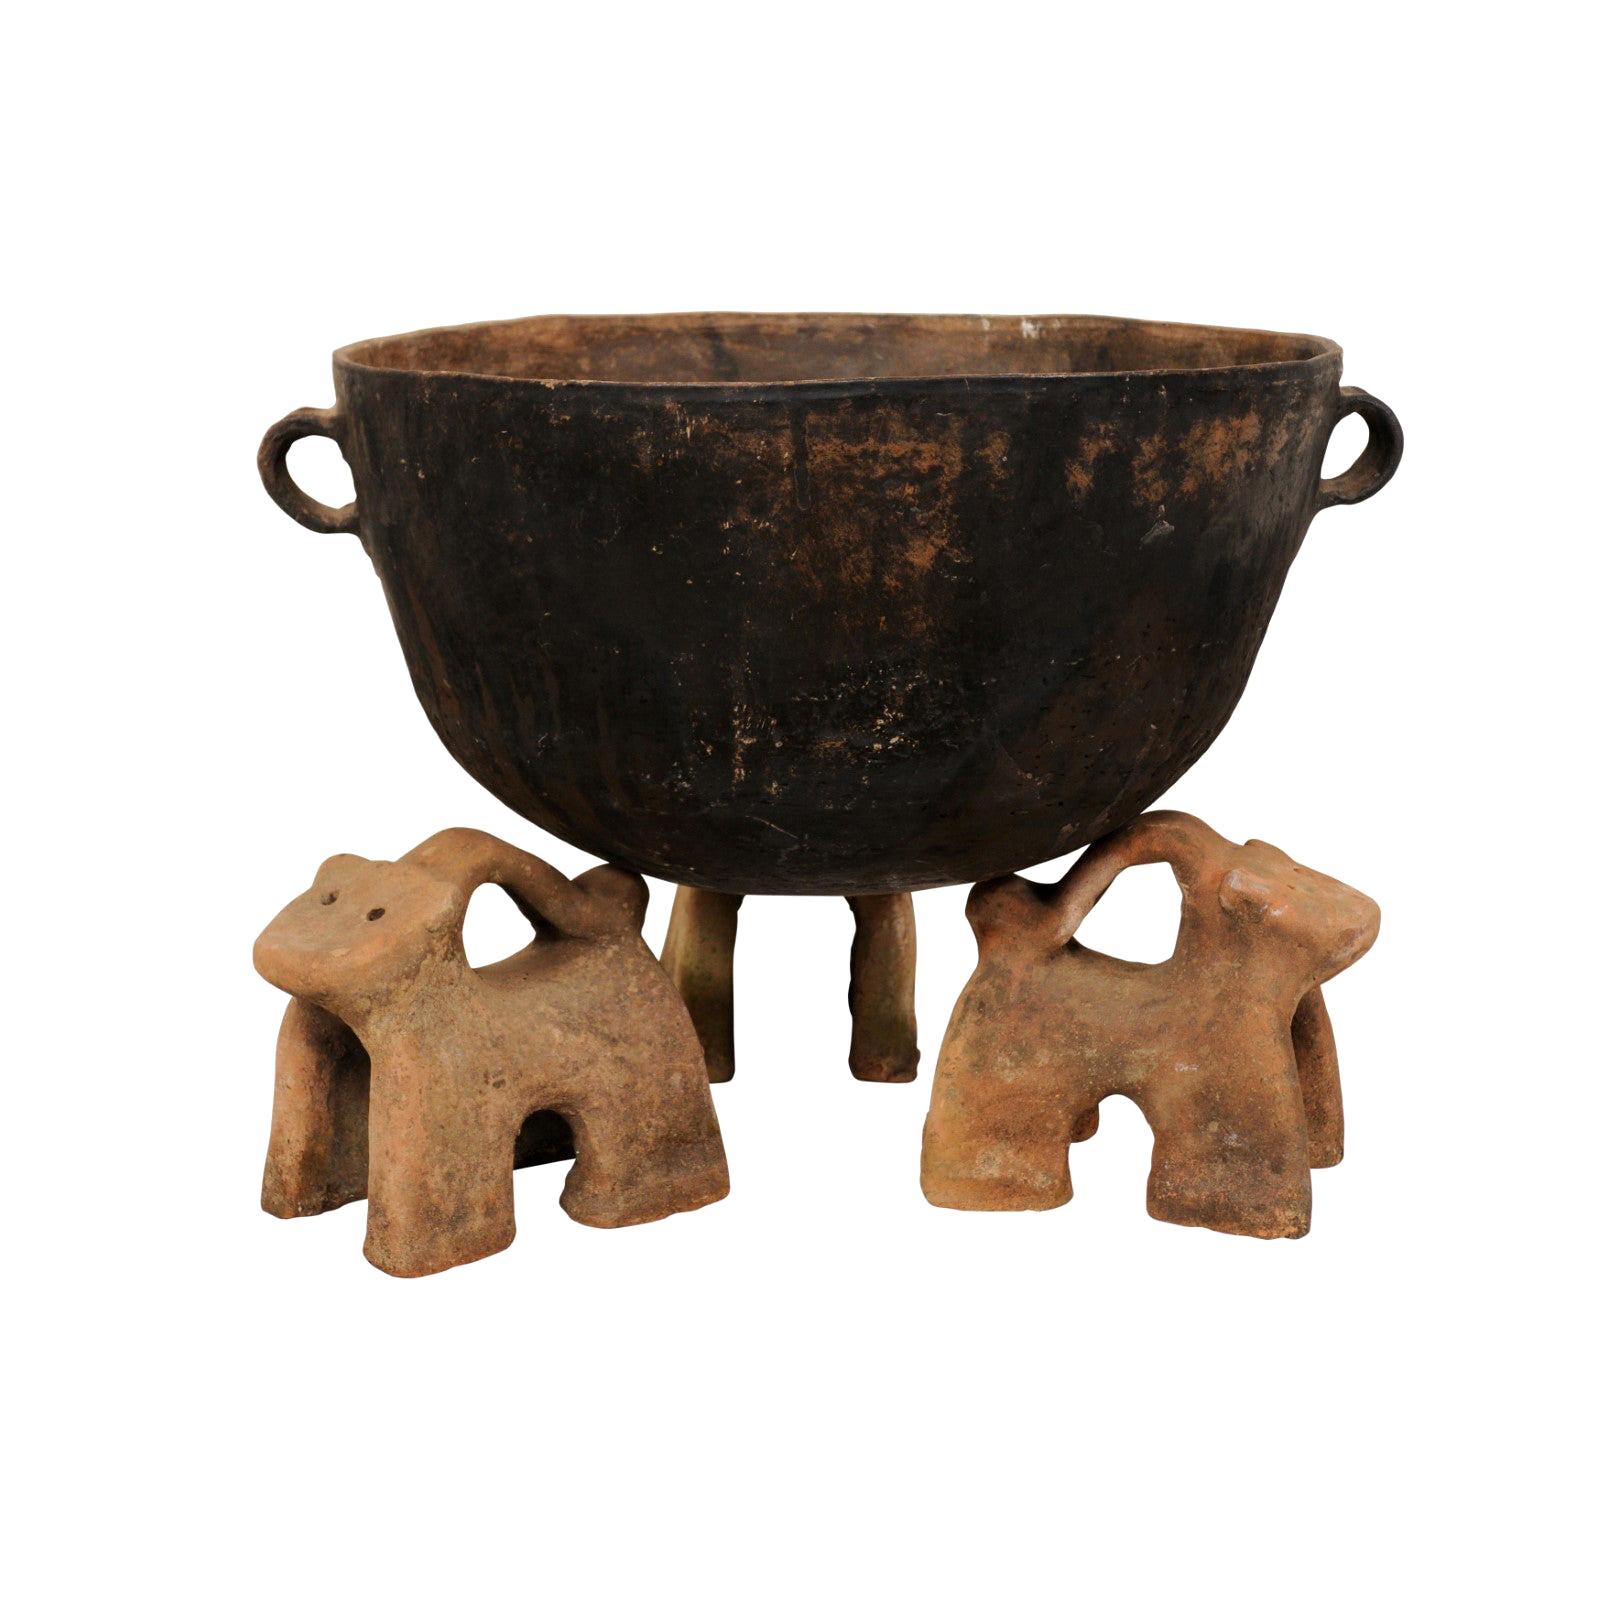 Vintage Mexican Mole Cooking Pot with 'Fire-Dog' Feet